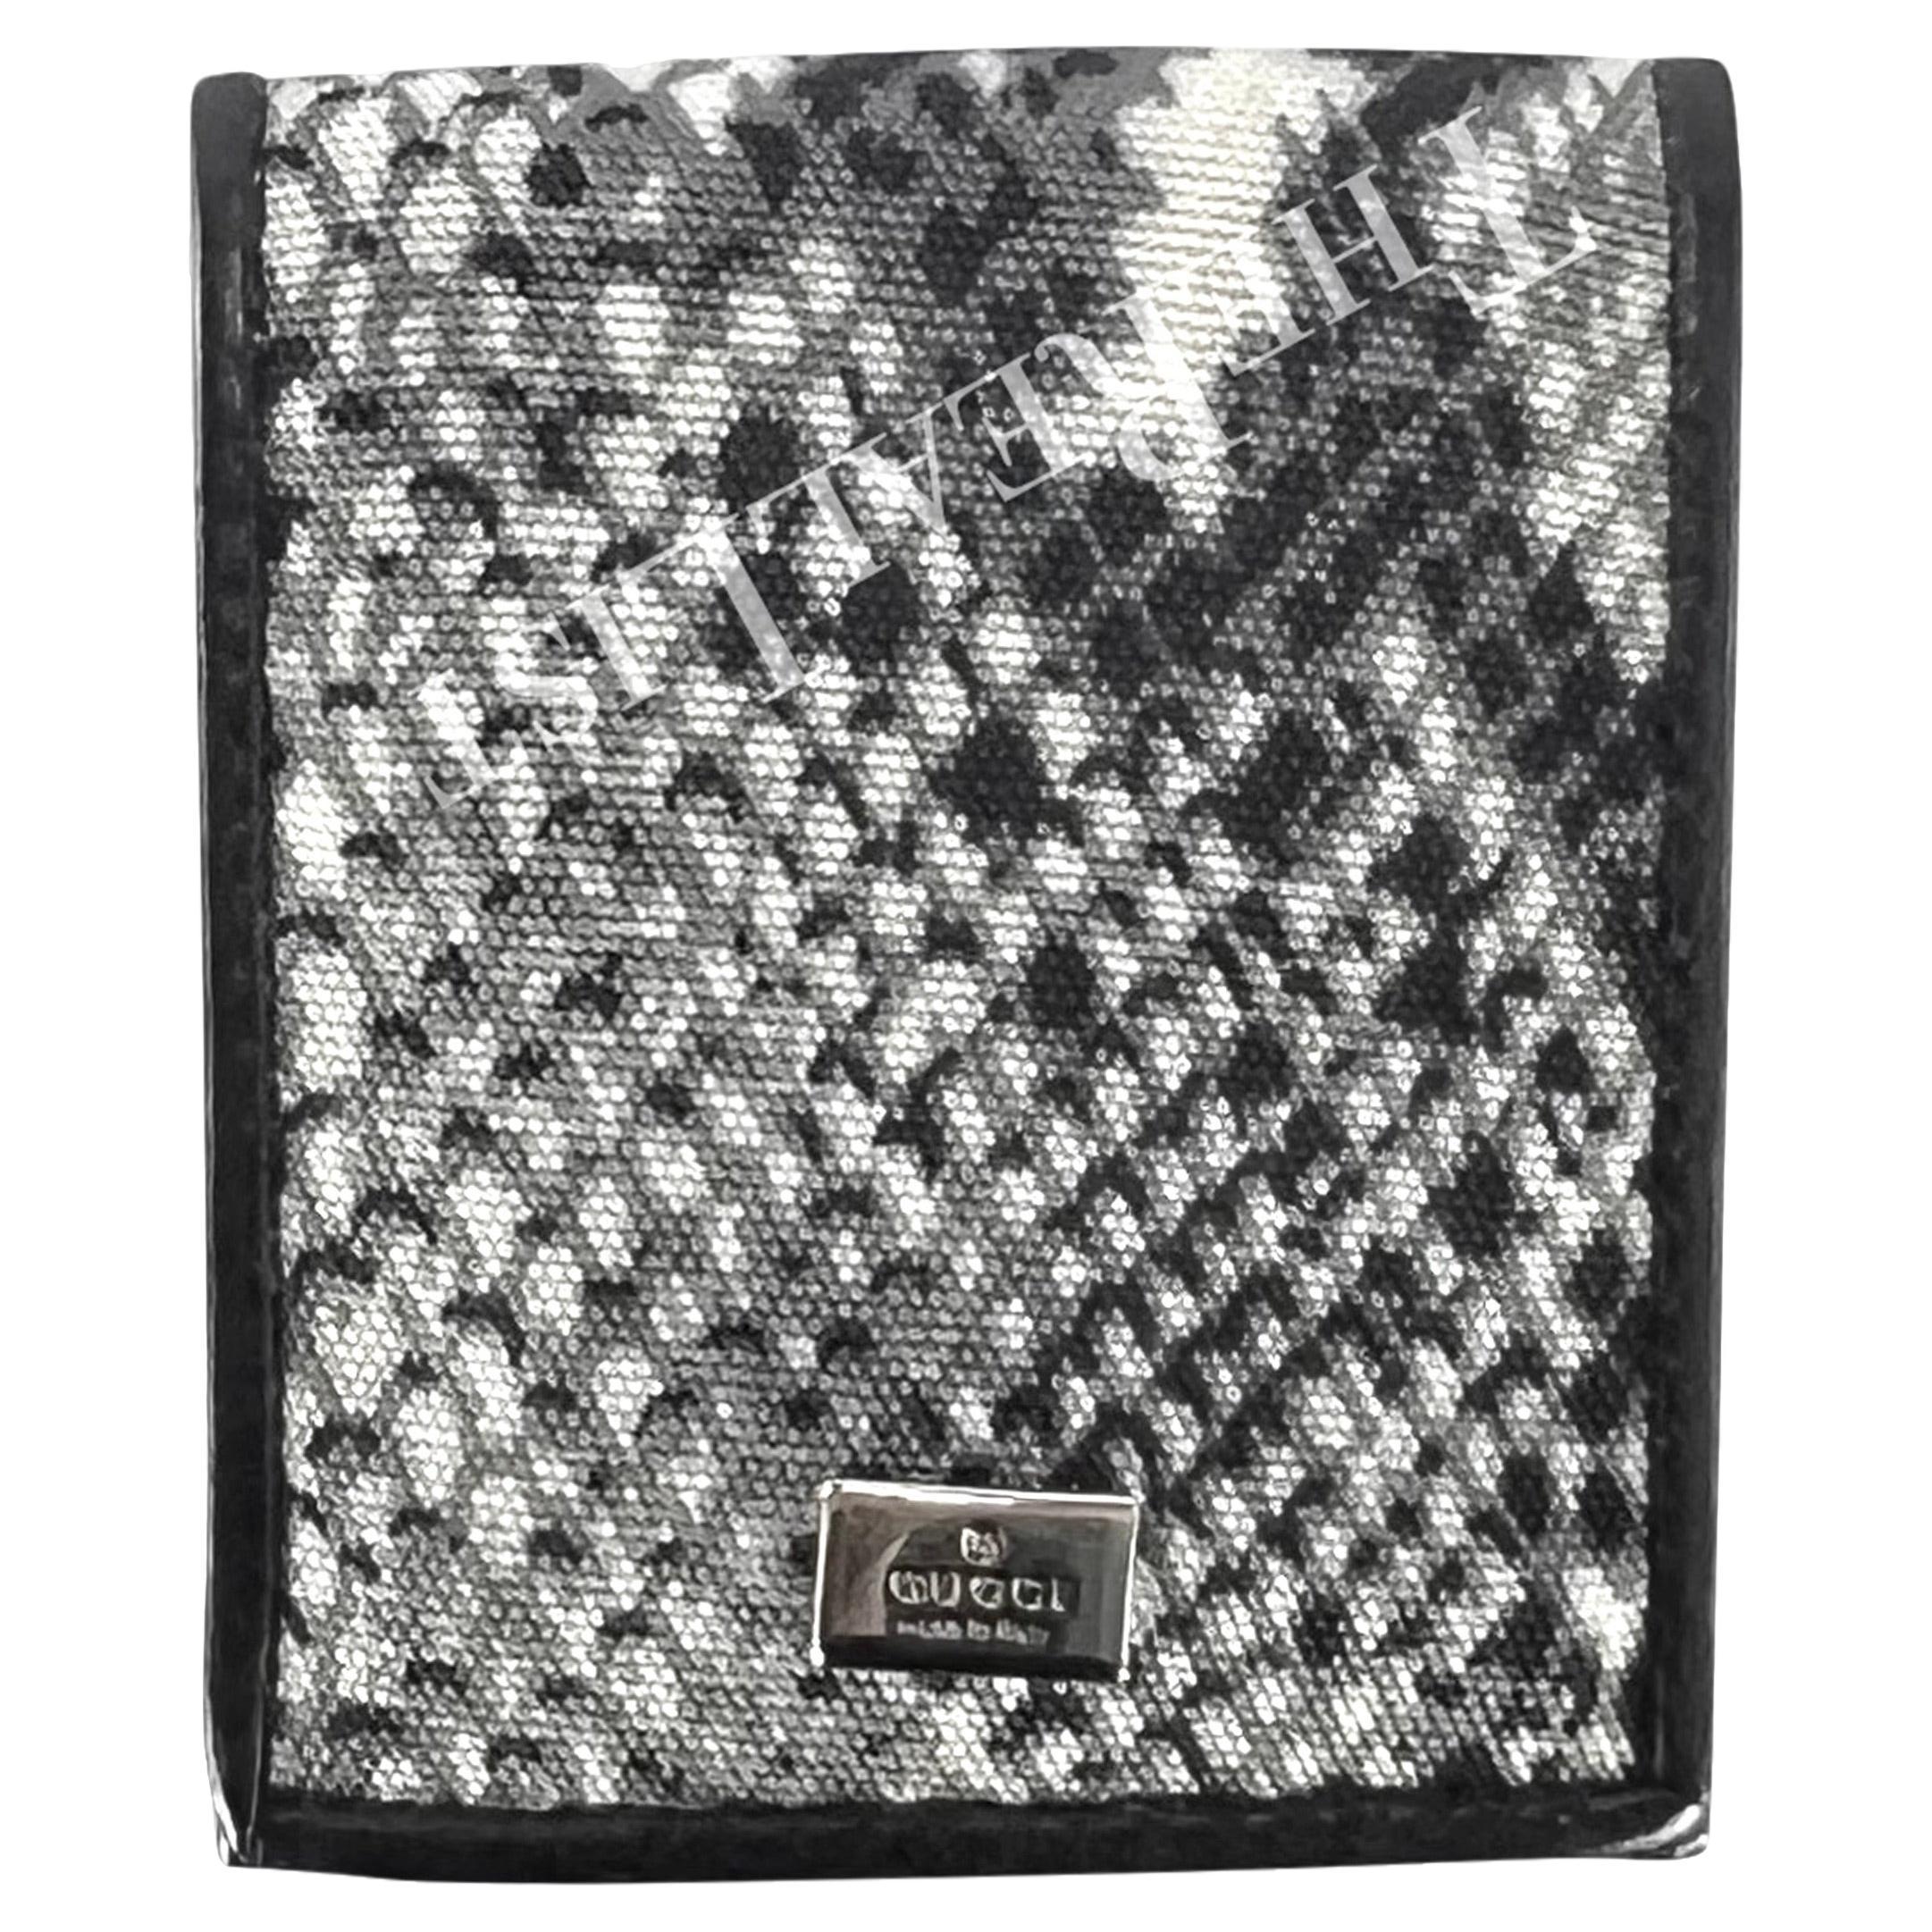 S/S 2000 Gucci by Tom Ford Grey Snake Print Condom Holder For Sale